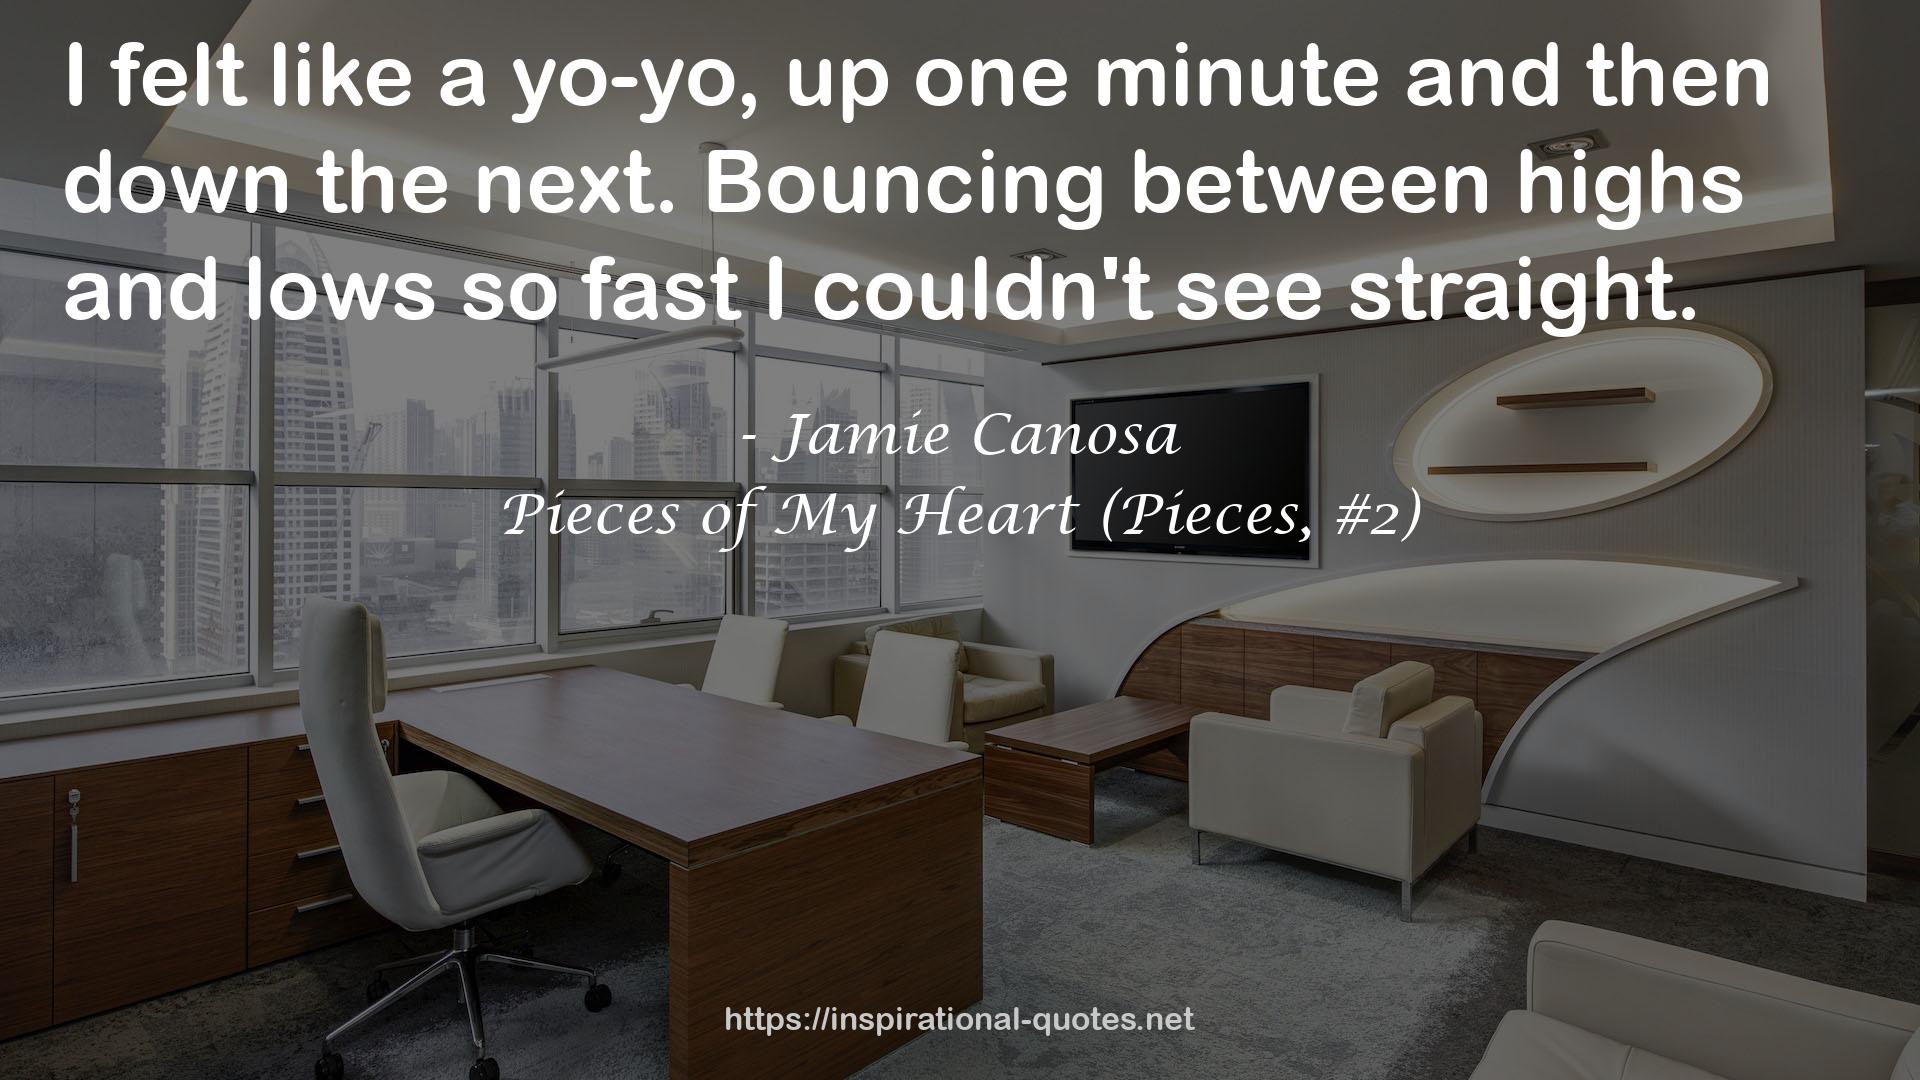 Pieces of My Heart (Pieces, #2) QUOTES